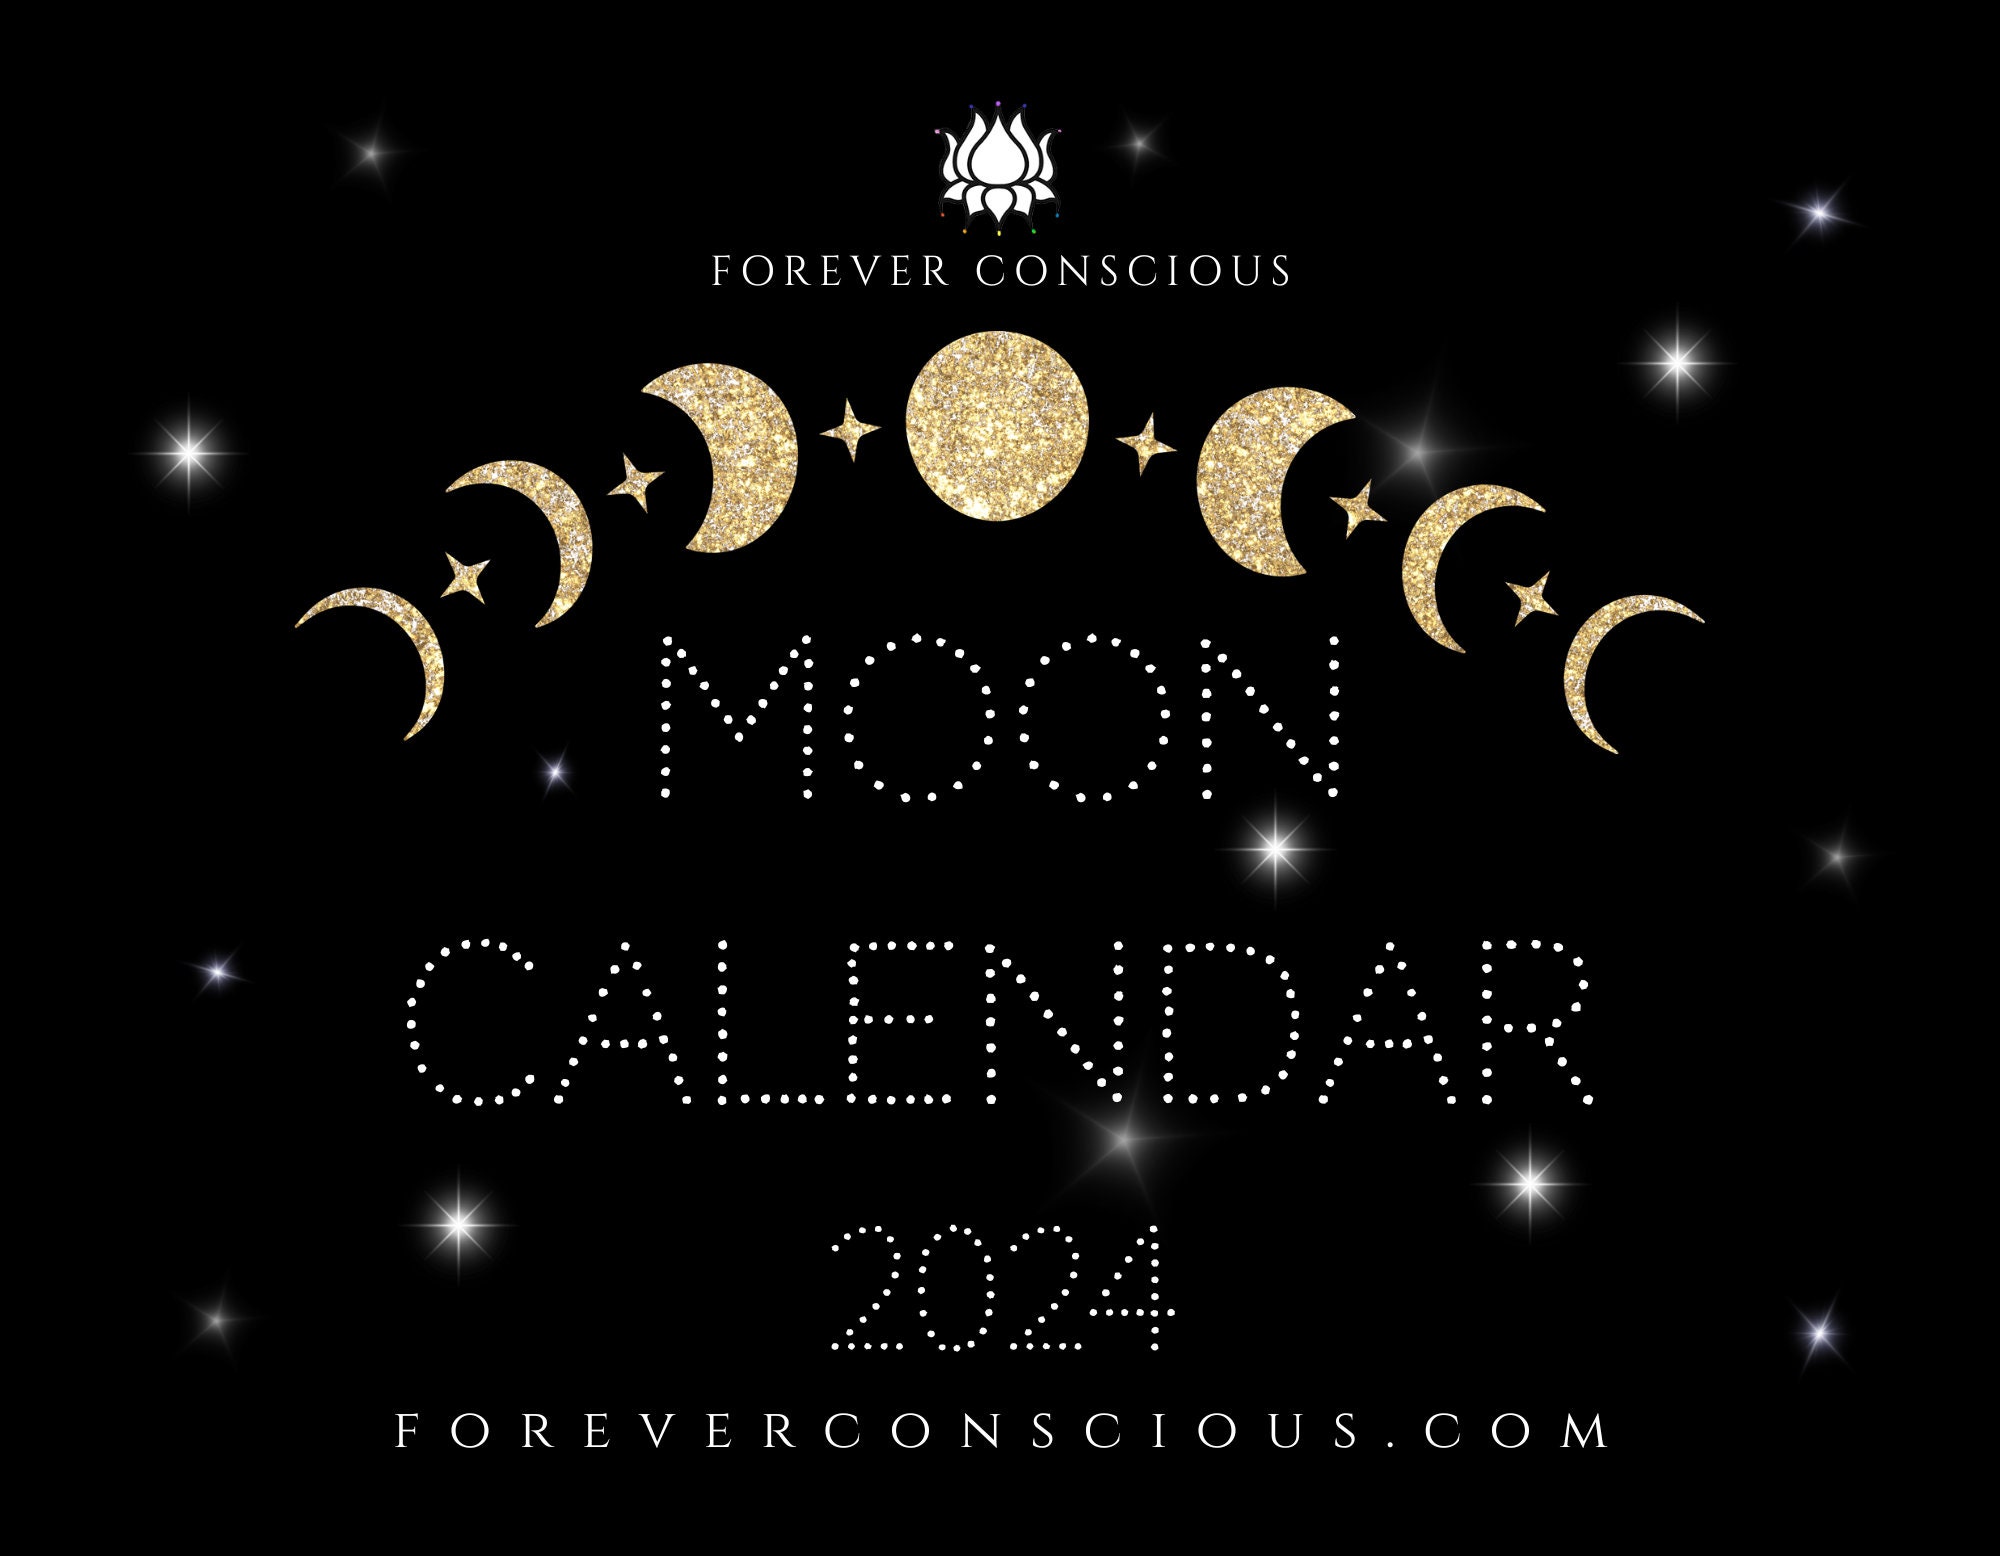 Calendrier Forever Young 2024